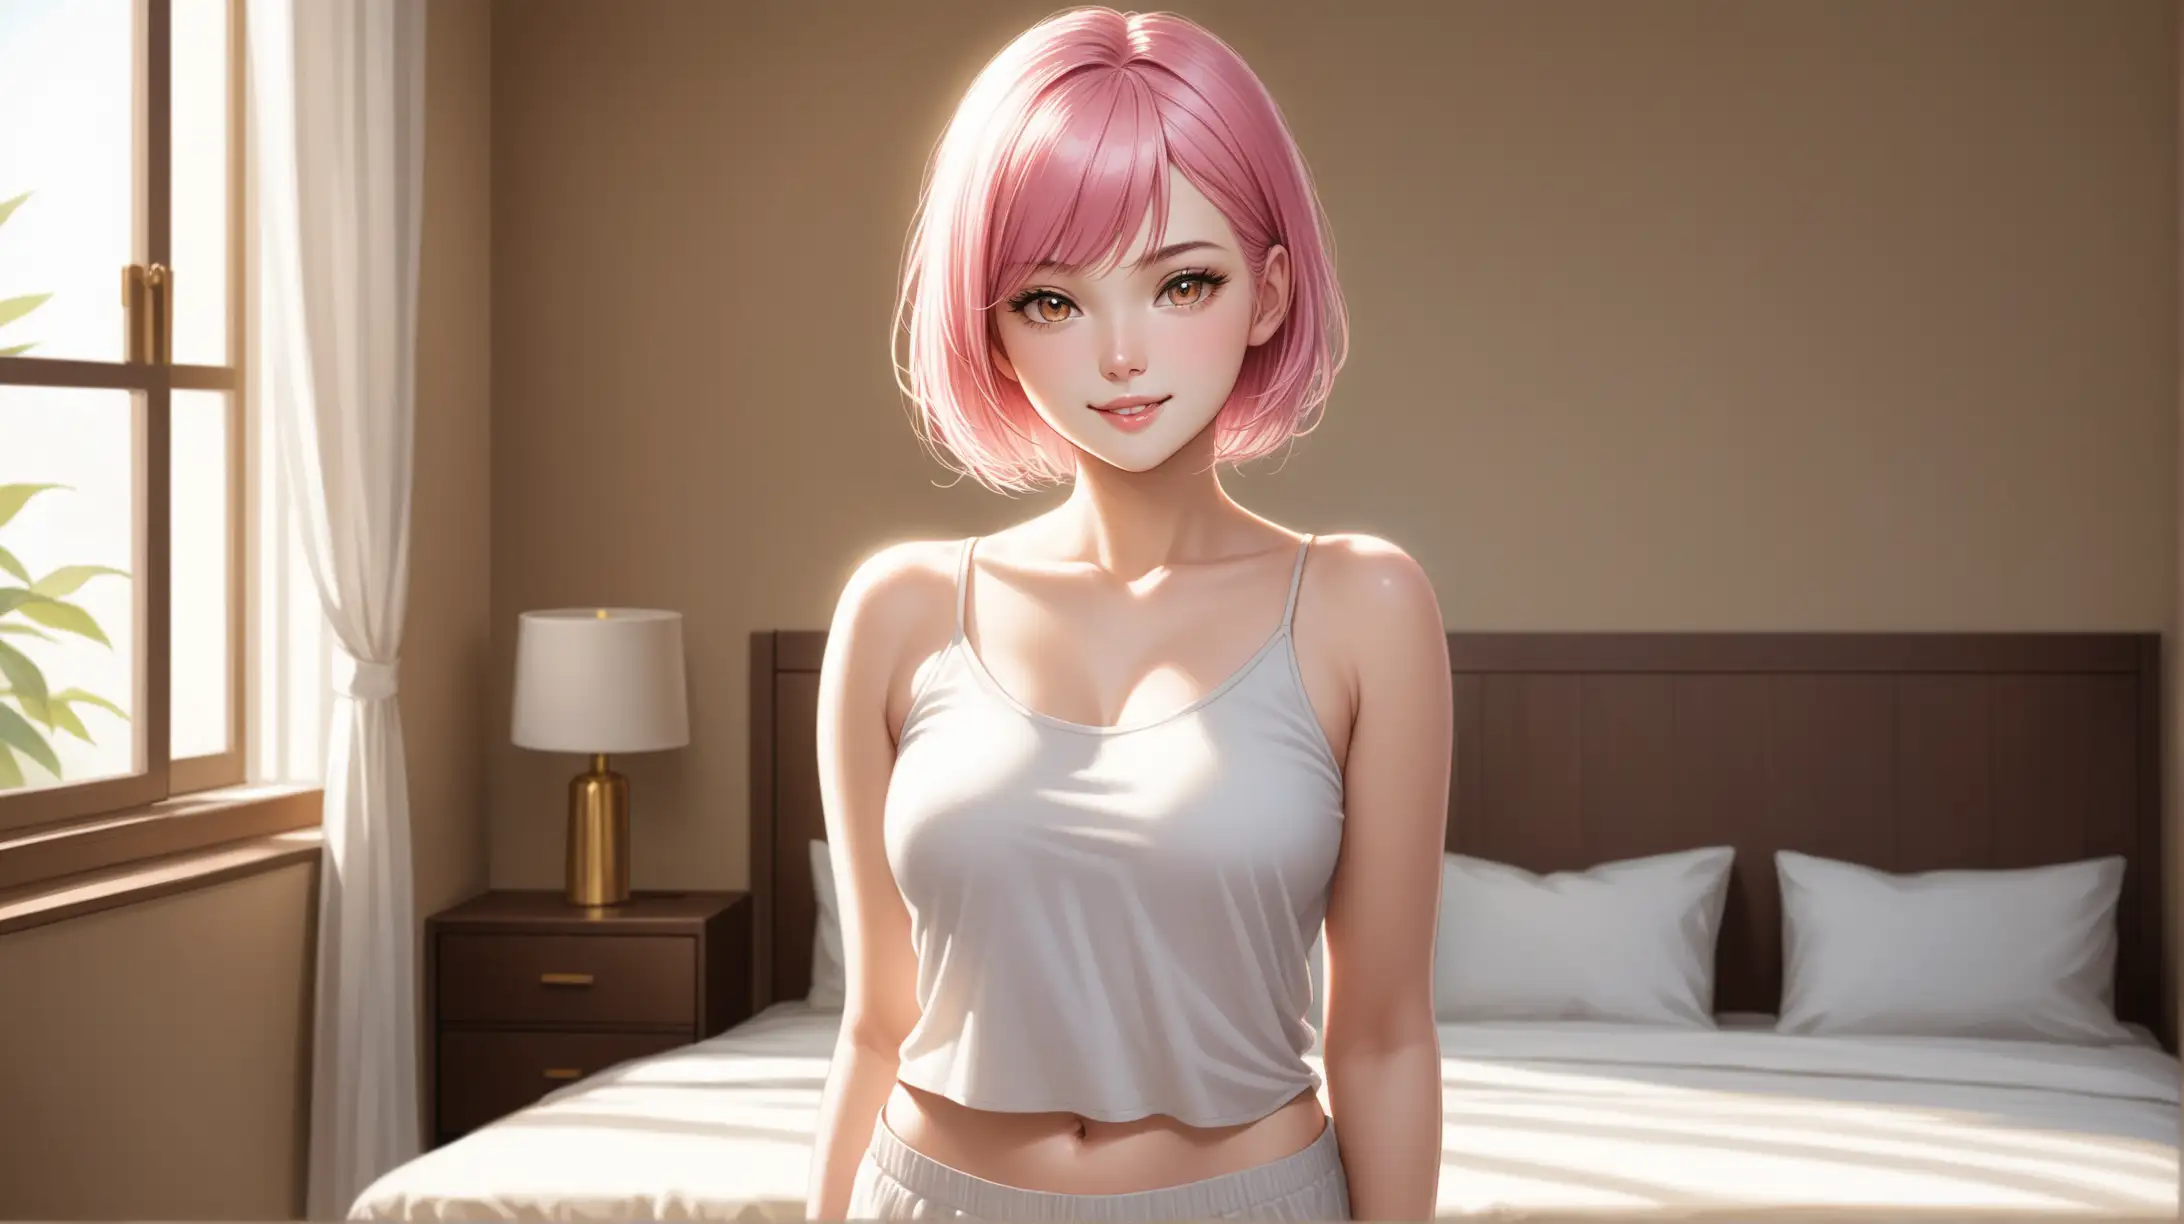 Realistic Portrait of a Woman with Pink Hair in a Bedroom Setting